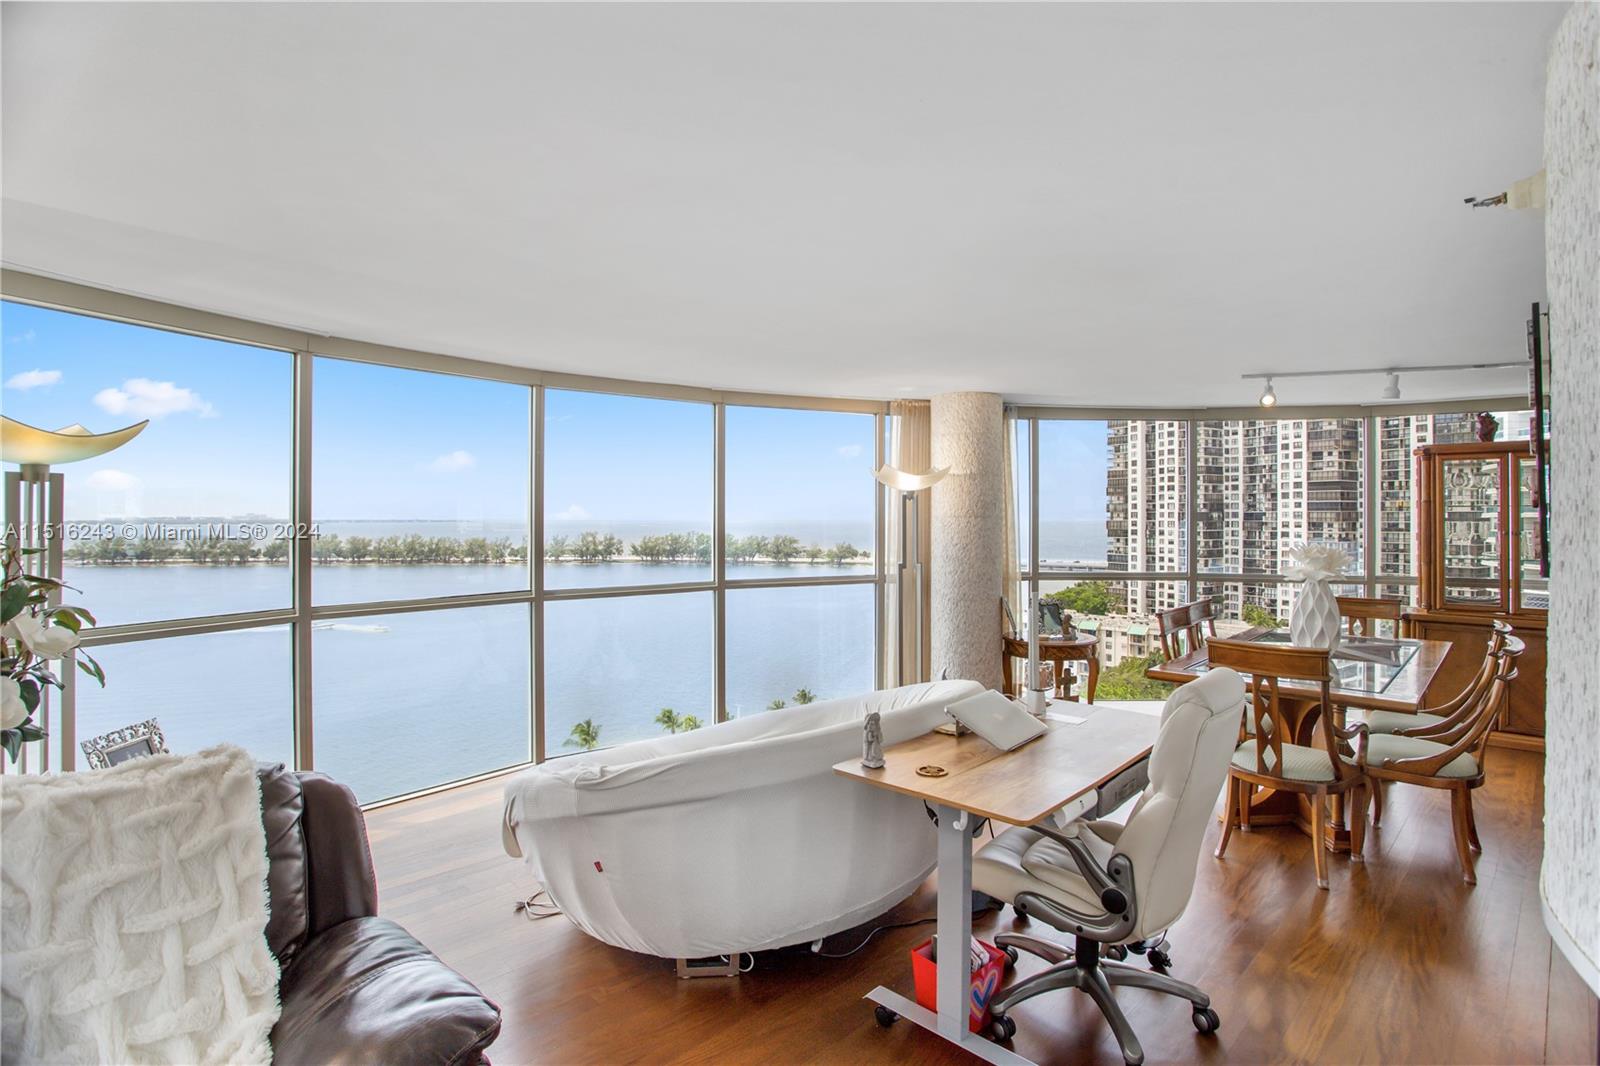 Prepare to be mesmerized by breathtaking 180-degree views of Biscayne Bay, visible through stunning wrap around floor to ceiling glass windows. This bright and spacious apartment boasts 3 bedrooms and 3 bathrooms, covering a generous 2,149 Sqft. With its thoughtfully designed split floor plan, it is perfect for families and hosting guests. Designed by the renowned architectural firm Arquitectonica, Atlantis on Brickell an array of resort-style amenities that include a bay-lever heated lap pool, tennis court, gym, and sly deck Jacuzzi. The building has easy access to I95, Key Biscayne, Coral Gables and Downtown Miami.